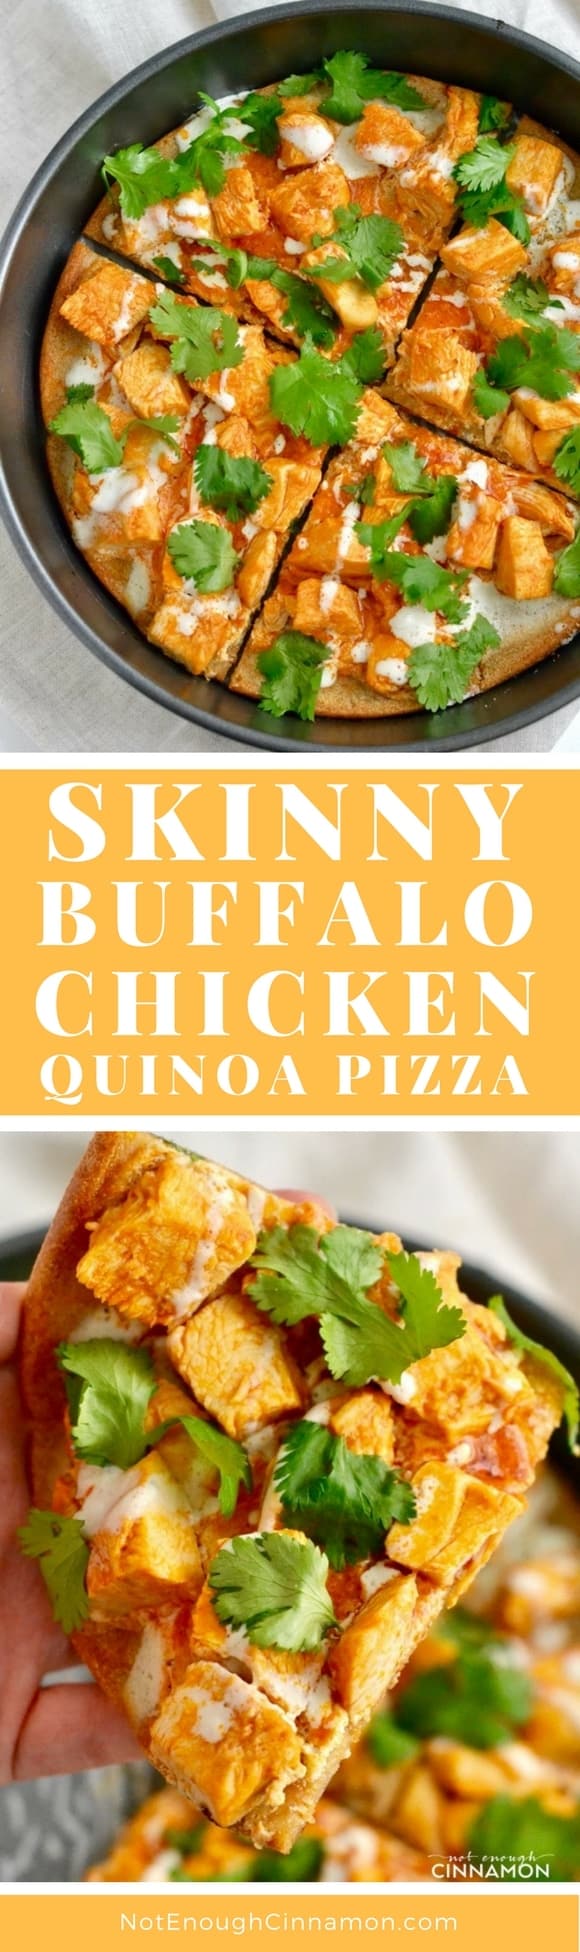 Skinny Buffalo Chicken Pizza made with a super easy Quinoa Crust - #glutenfree #cleaneating - Click here to see the recipe on NotEnoughCinnamon.com